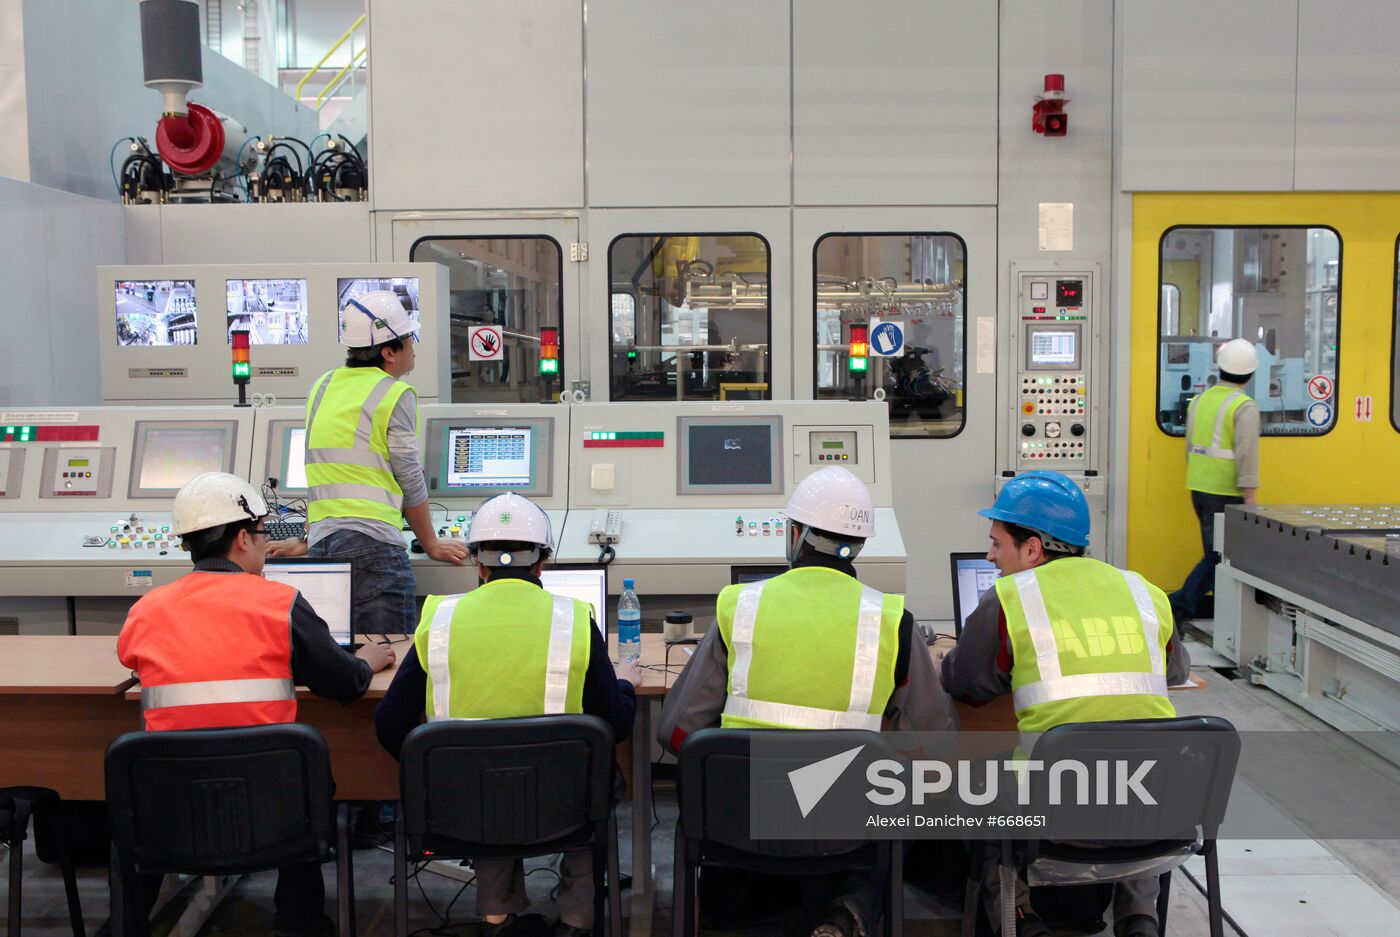 Test operation of stamping line of Hyundai in St. Petersburg